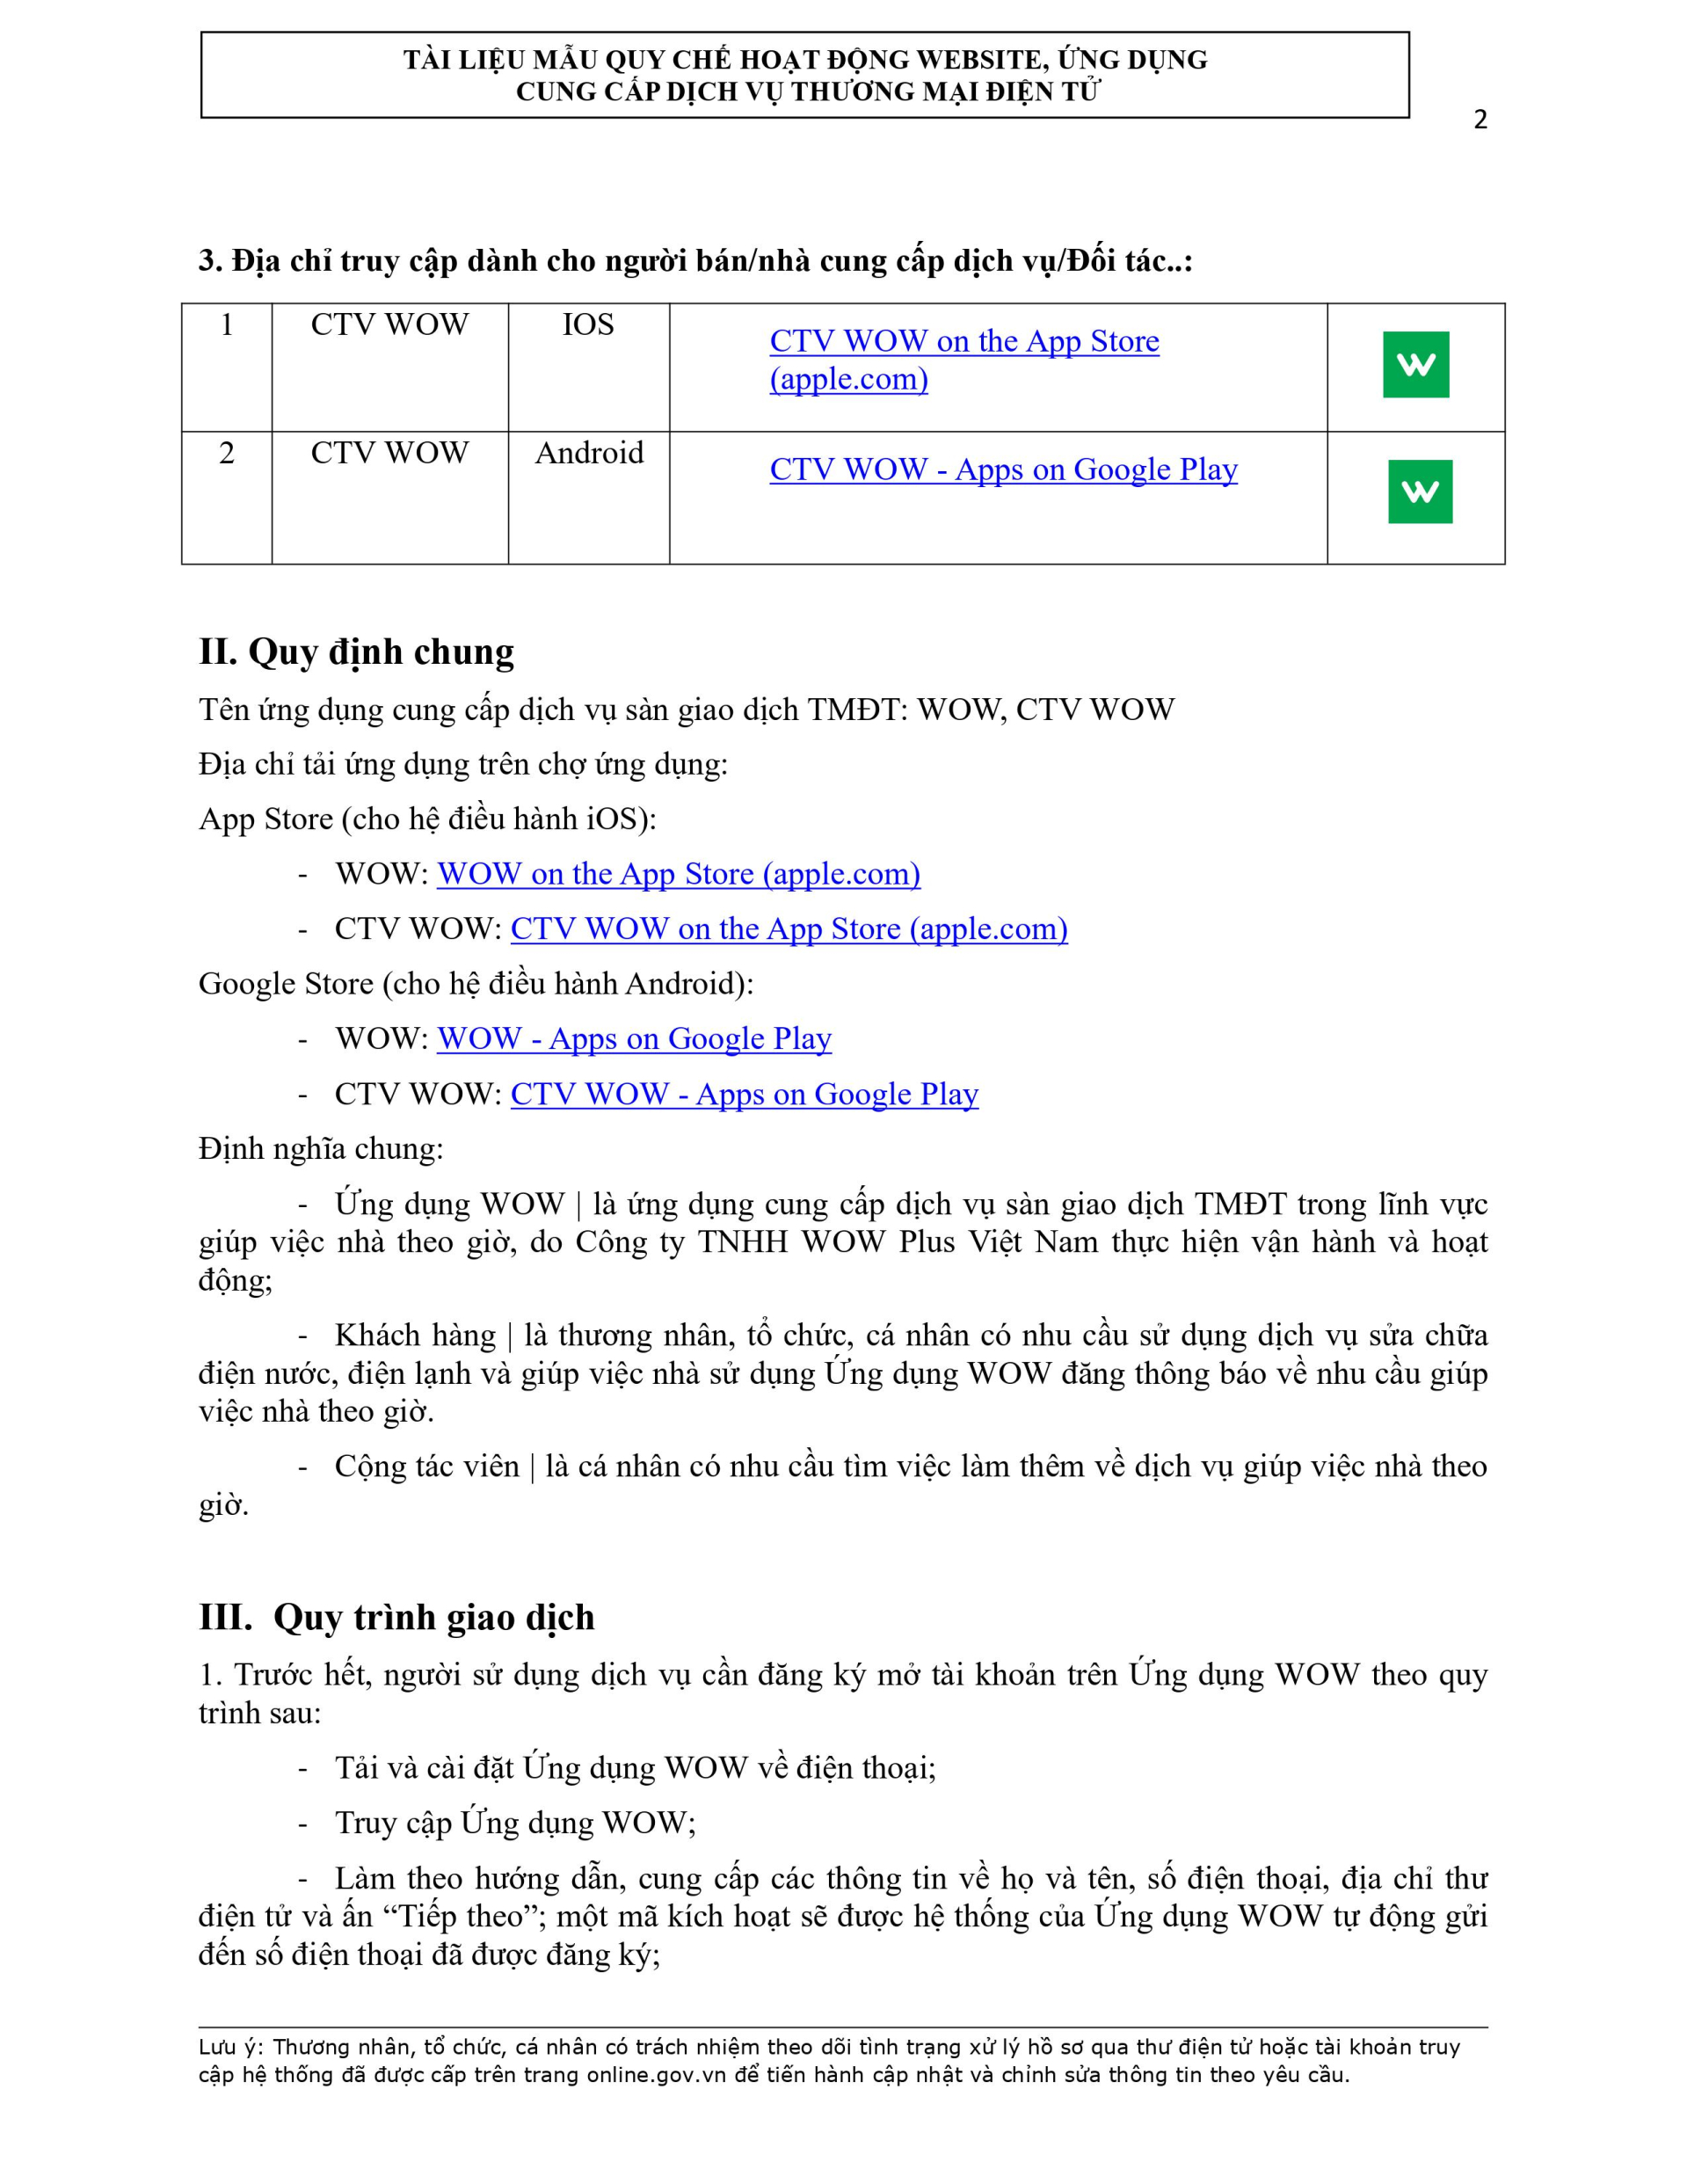 quy-che-hoat-dong-ung-dung-wow-page-0002